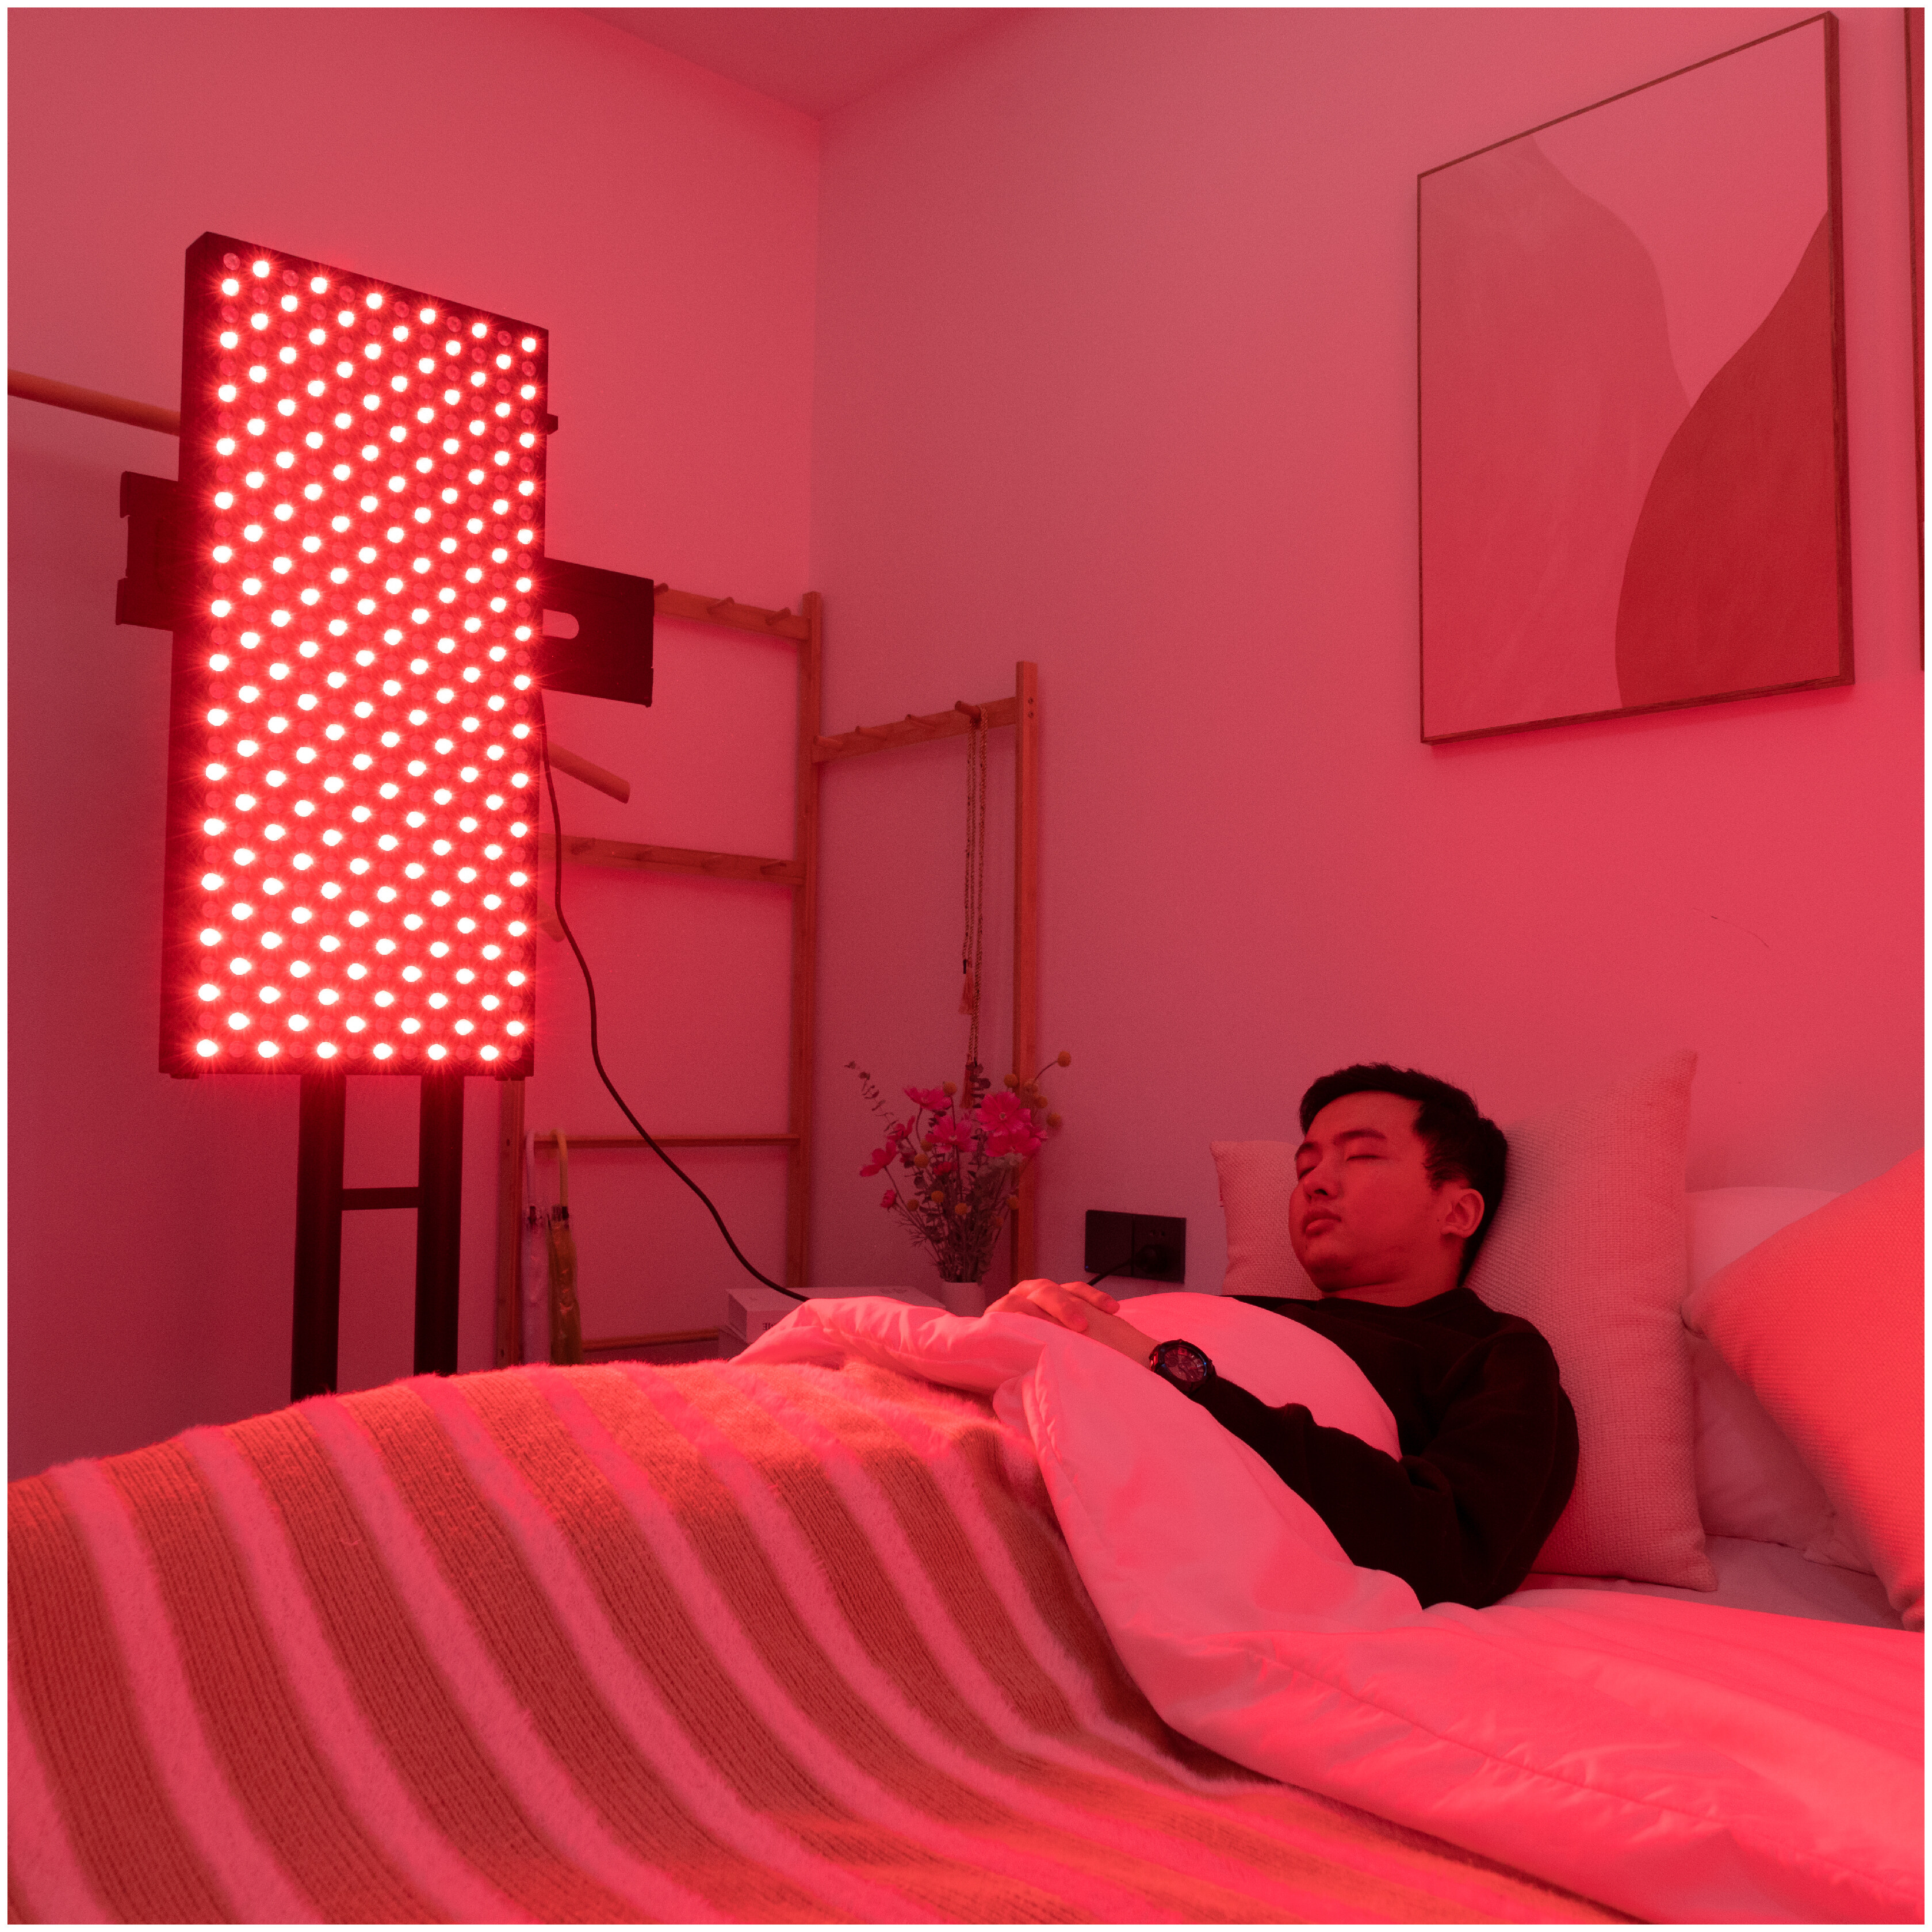 red led light therapy for skin, red light therapy on skin, red and blue light therapy for skin, red light therapy for skin at home, red light therapy for skin at-home, red light therapy for aging skin, red light therapy for skin healing